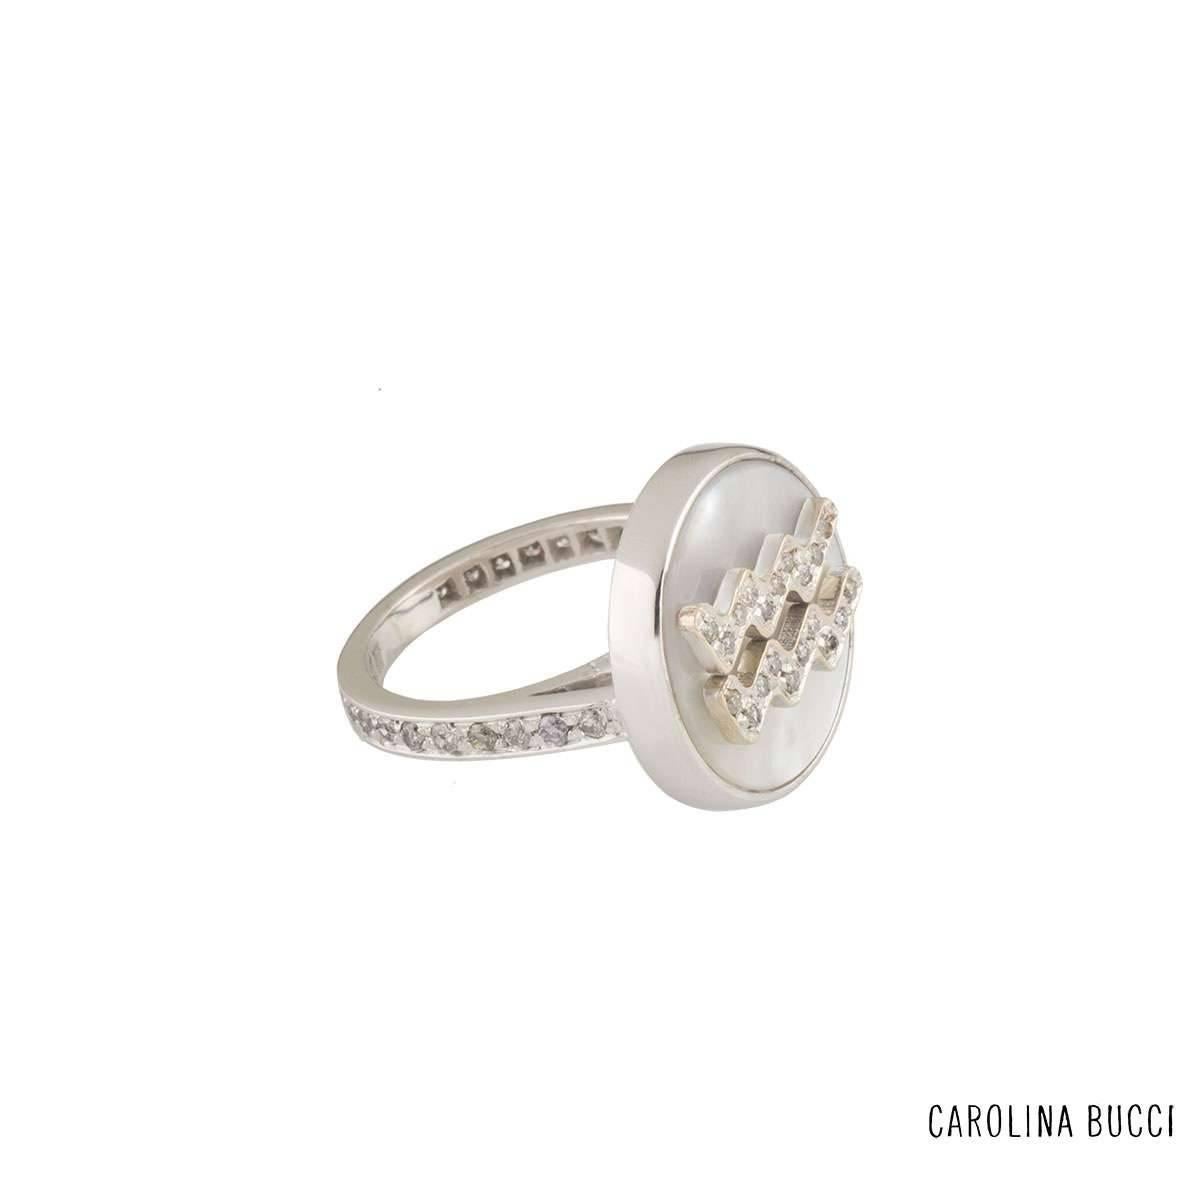 A unique 18k white gold diamond and mother of pearl Carolina Bucci ring from the Lucky Zodiac collection. The ring comprises of a circular motif with a mother of pearl inlay in a rubover setting. Complementing this motif is the aquarius zodiac sign